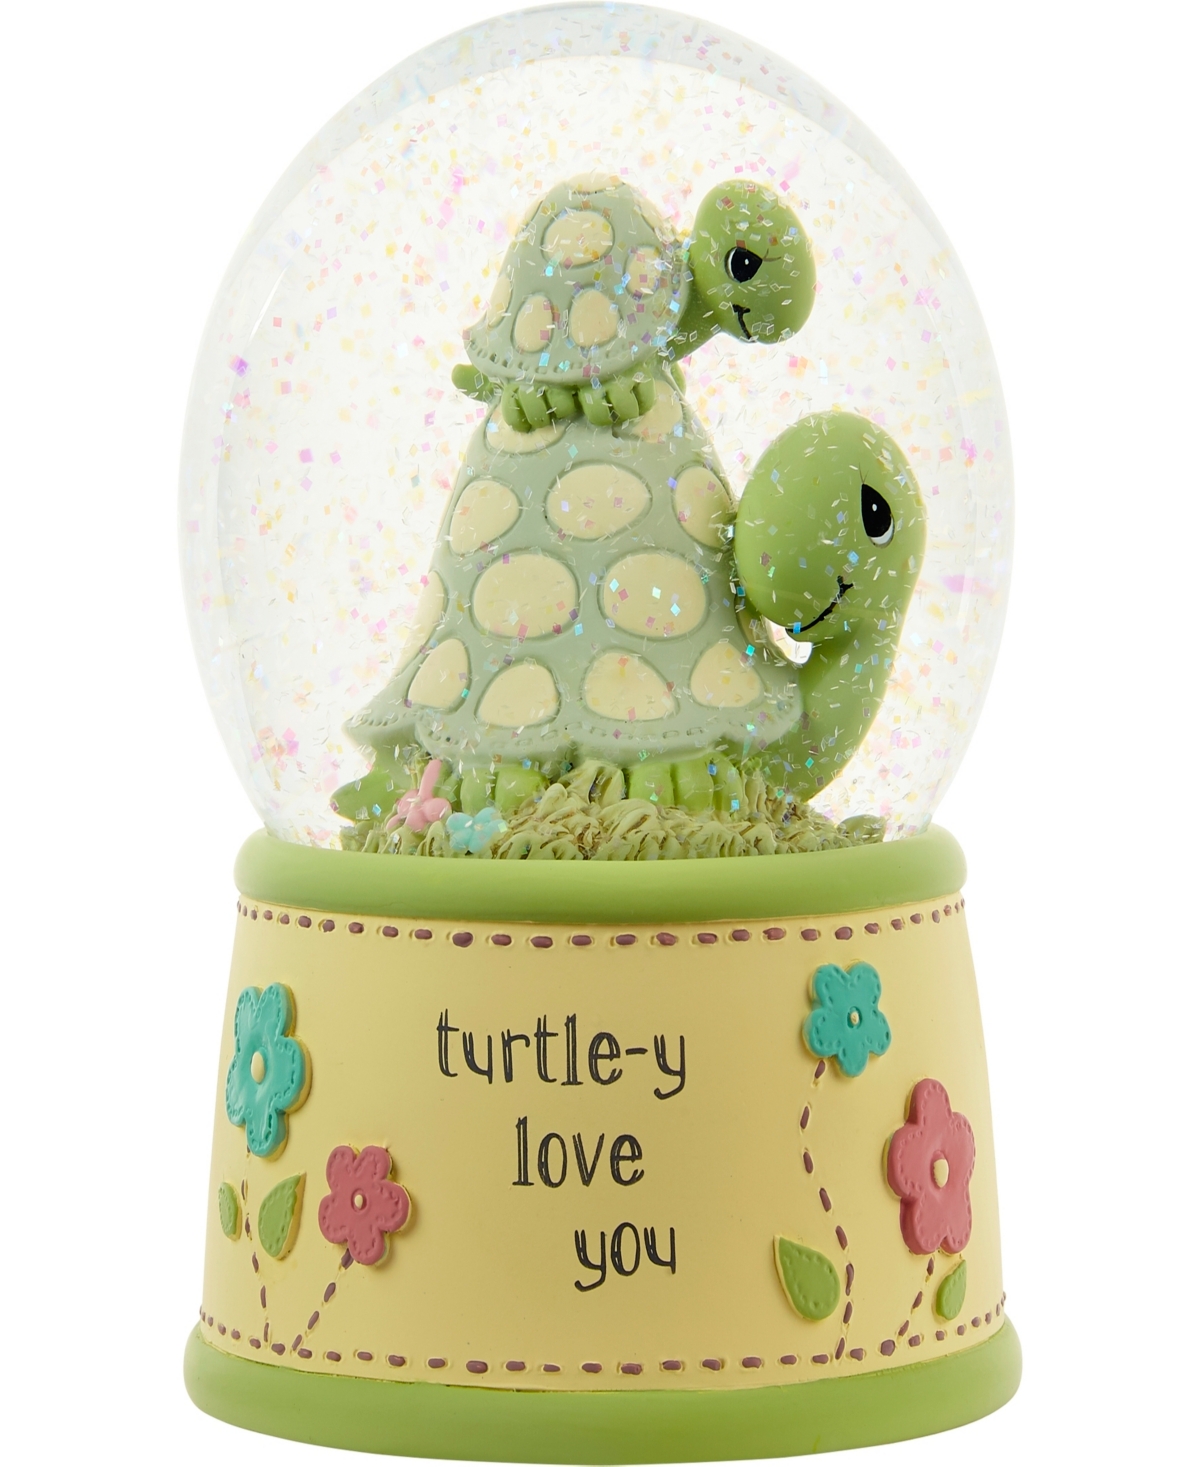 222102 Turtle-y Love You Resin and Glass Musical Snow Globe - Multicolored